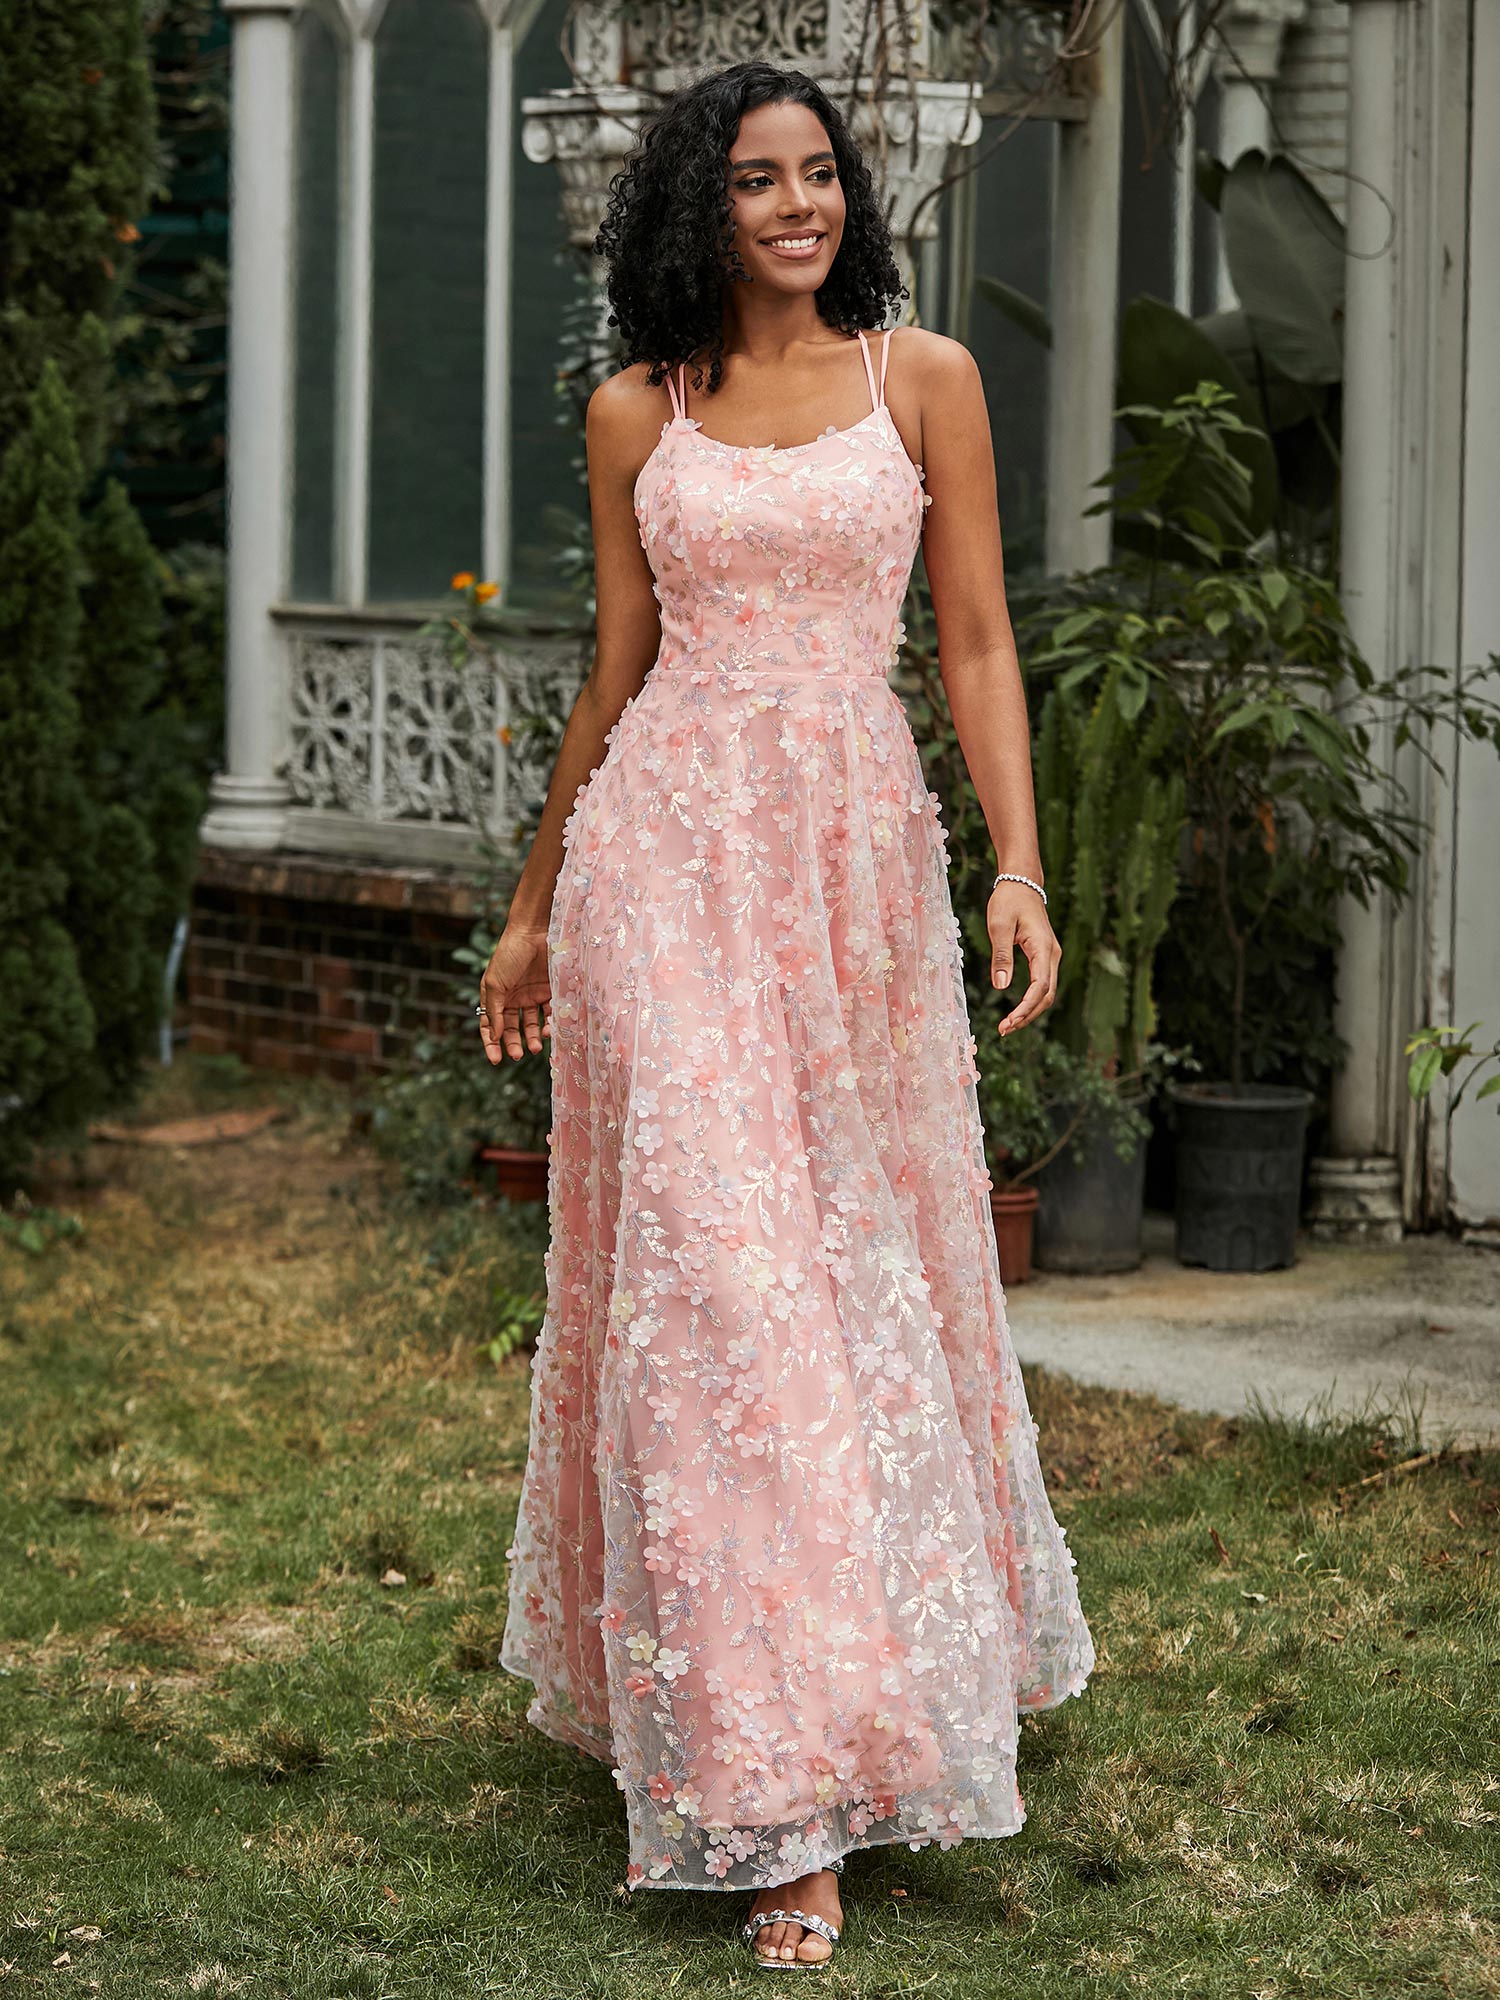 Spaghetti Straps Lace-up Flowers Appliqued Prom Dress Coral